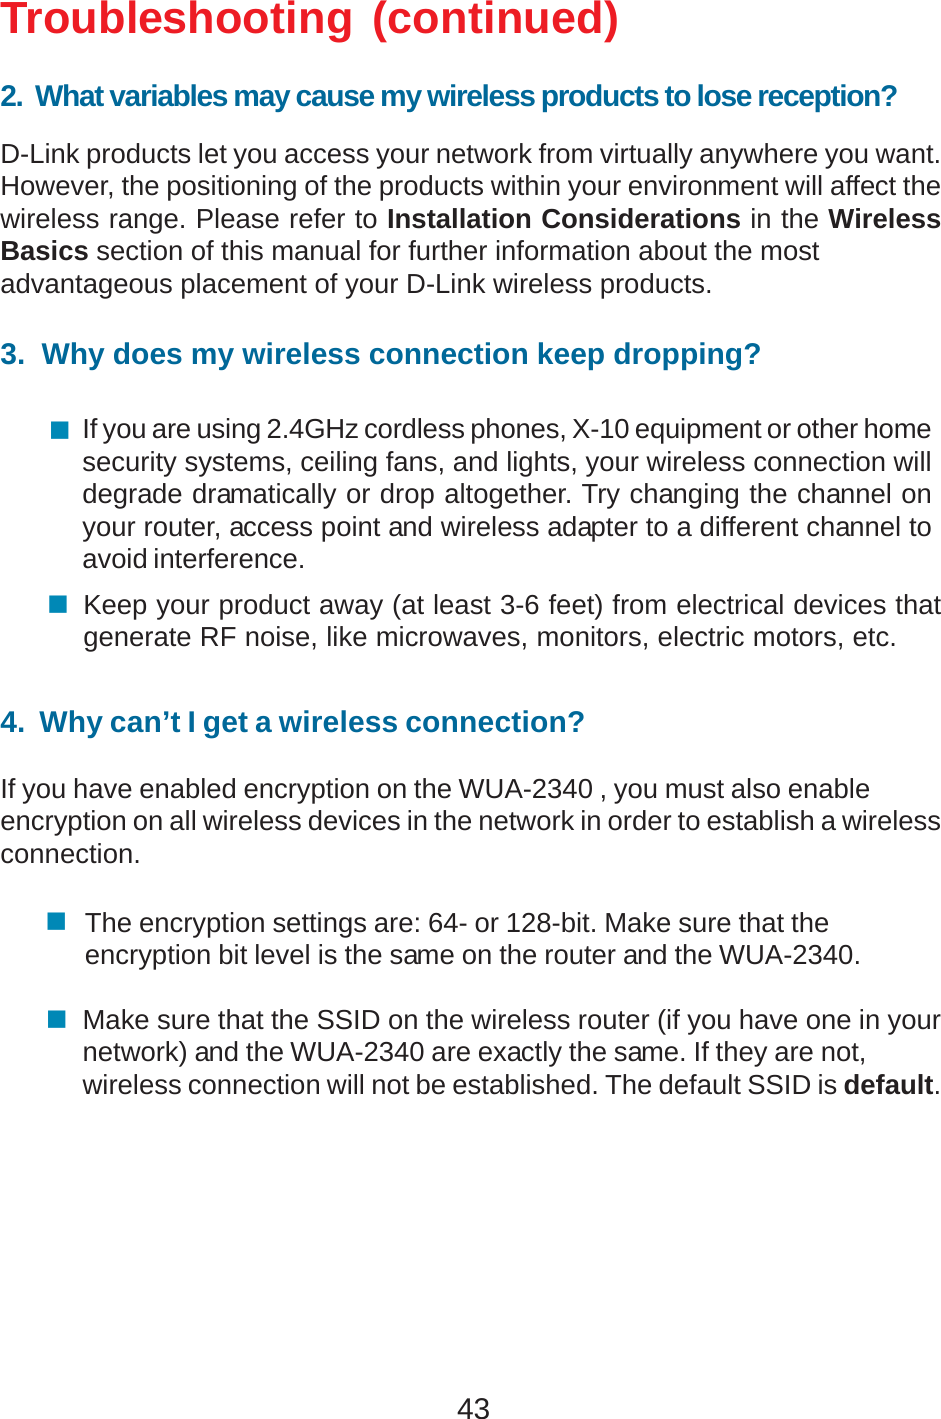 43Troubleshooting (continued)2.  What variables may cause my wireless products to lose reception?D-Link products let you access your network from virtually anywhere you want.However, the positioning of the products within your environment will affect thewireless range. Please refer to Installation Considerations in the WirelessBasics section of this manual for further information about the mostadvantageous placement of your D-Link wireless products.3.  Why does my wireless connection keep dropping?4.  Why can’t I get a wireless connection?If you have enabled encryption on the WUA-2340 , you must also enableencryption on all wireless devices in the network in order to establish a wirelessconnection.If you are using 2.4GHz cordless phones, X-10 equipment or other homesecurity systems, ceiling fans, and lights, your wireless connection willdegrade dramatically or drop altogether. Try changing the channel onyour router, access point and wireless adapter to a different channel toavoid interference.Keep your product away (at least 3-6 feet) from electrical devices thatgenerate RF noise, like microwaves, monitors, electric motors, etc.The encryption settings are: 64- or 128-bit. Make sure that theencryption bit level is the same on the router and the WUA-2340.Make sure that the SSID on the wireless router (if you have one in yournetwork) and the WUA-2340 are exactly the same. If they are not,wireless connection will not be established. The default SSID is default.